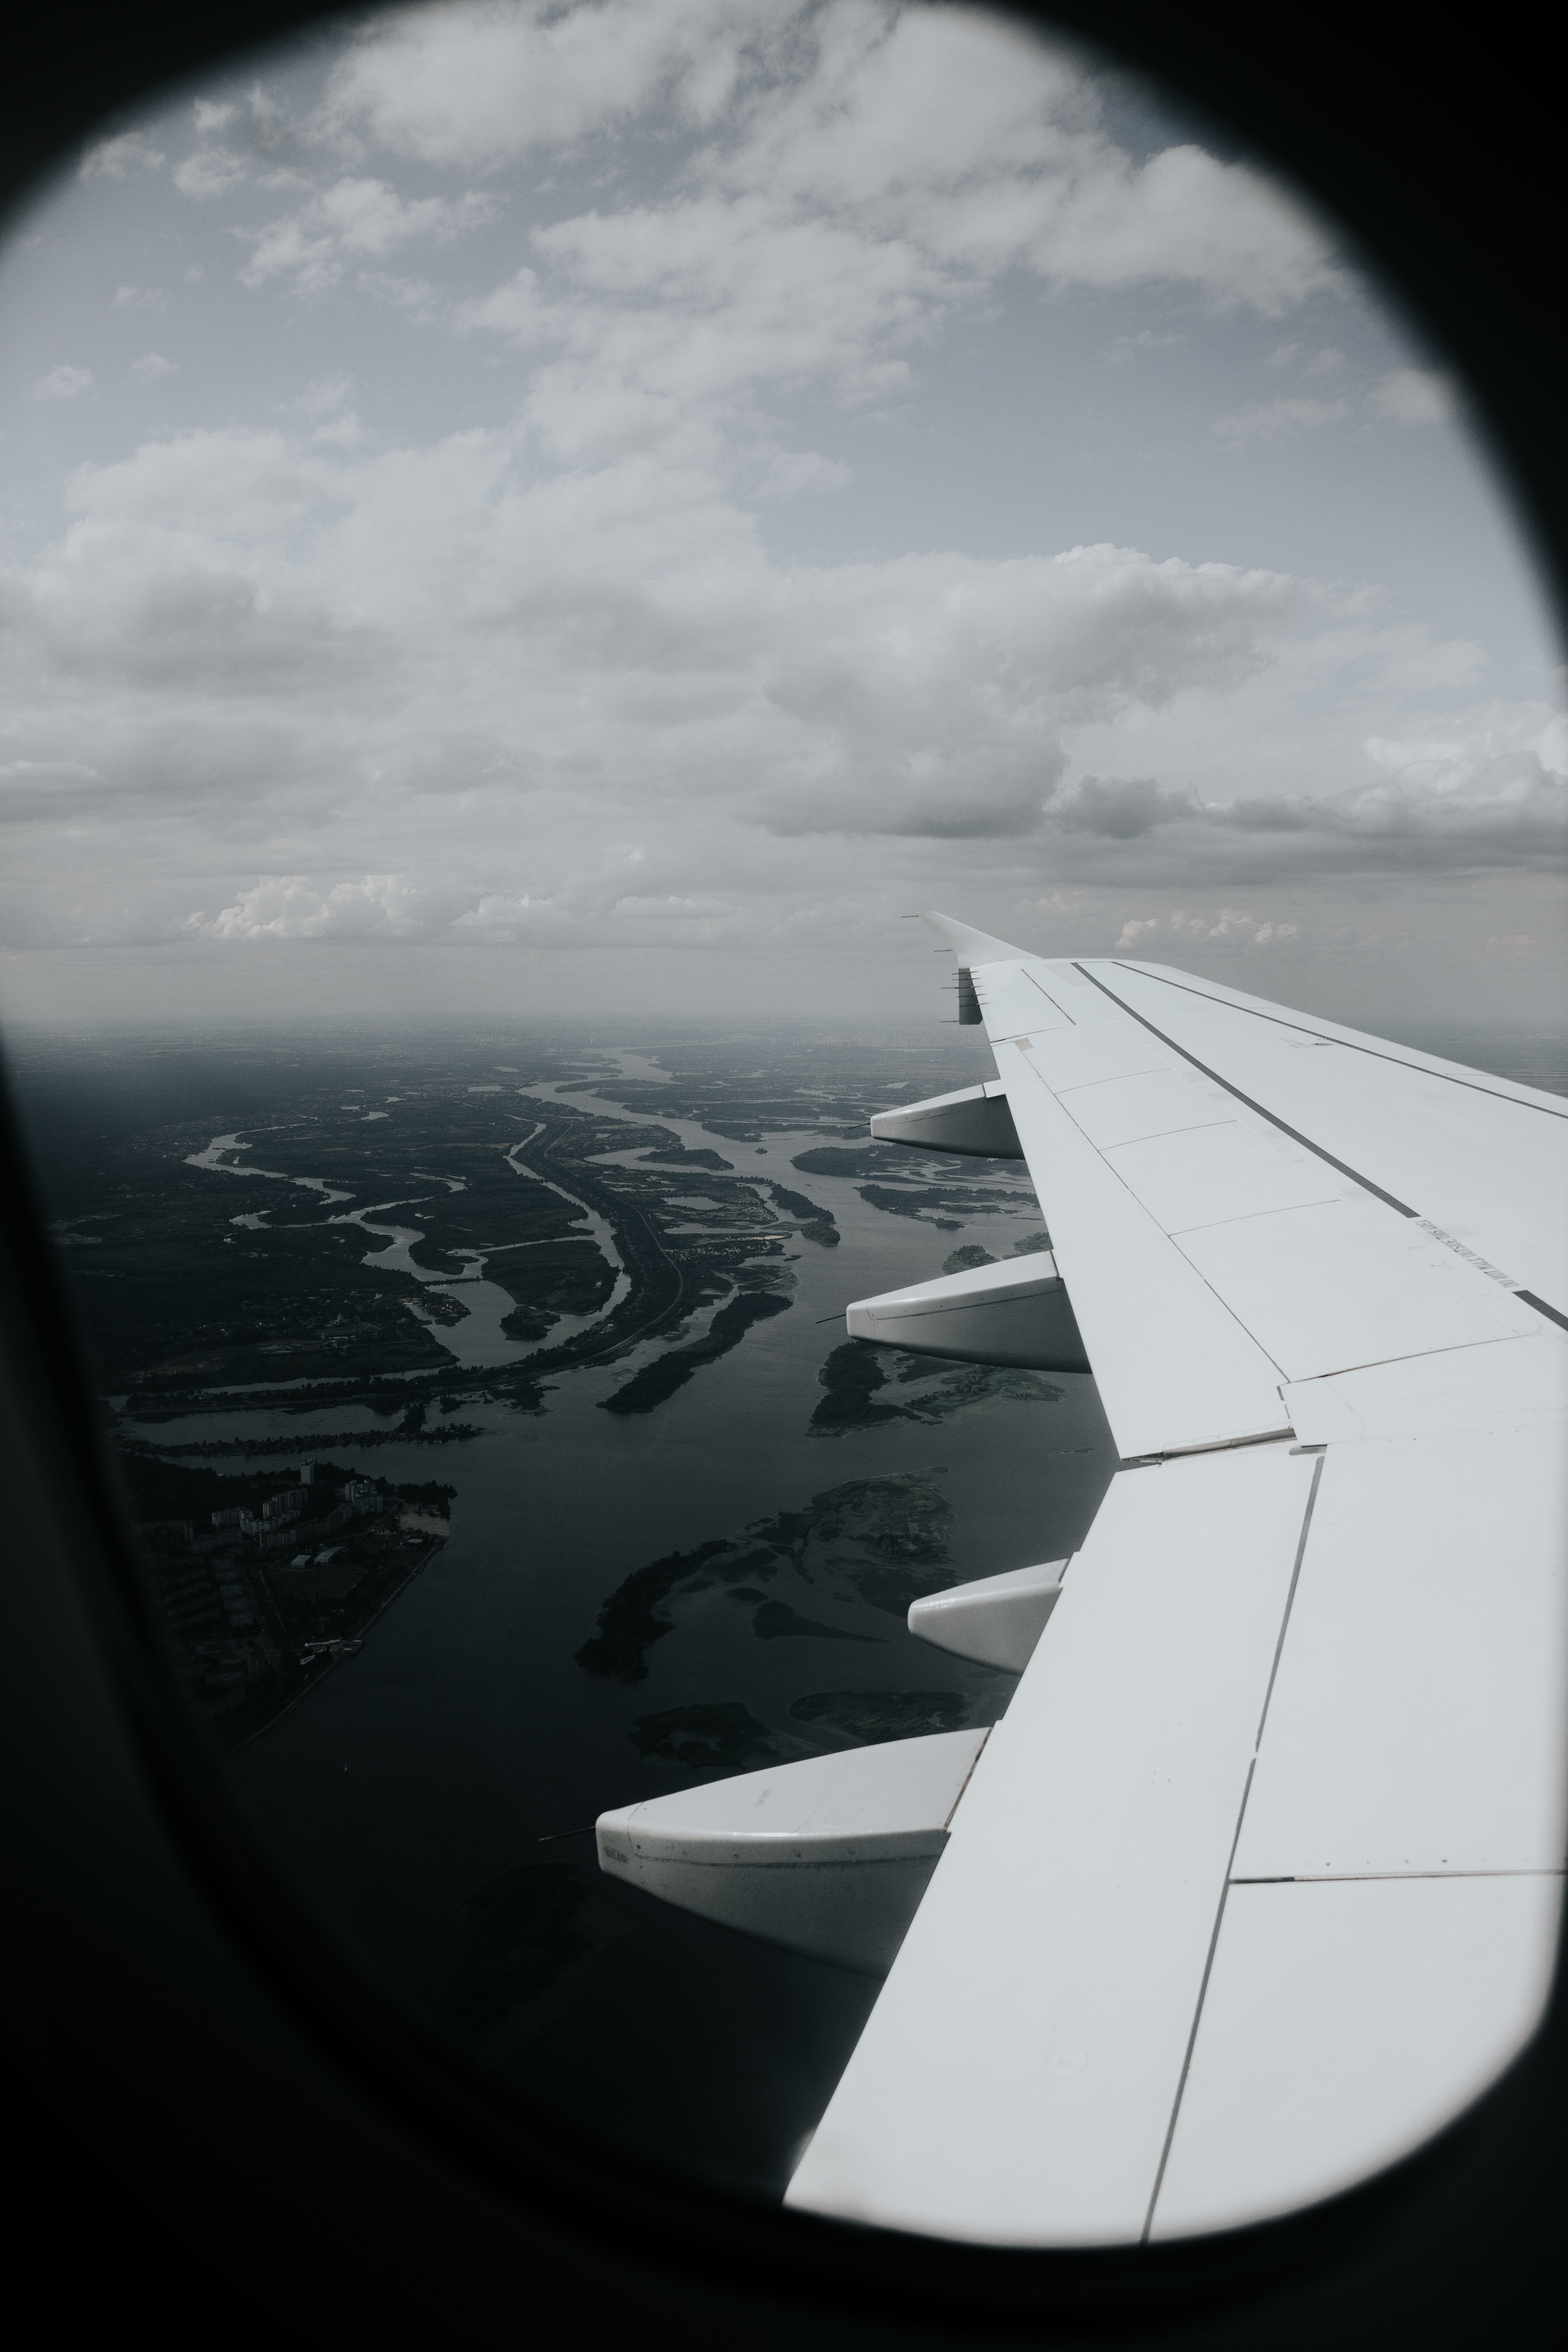 wing, plane, miscellanea, miscellaneous, overview, review, porthole, airplane, view